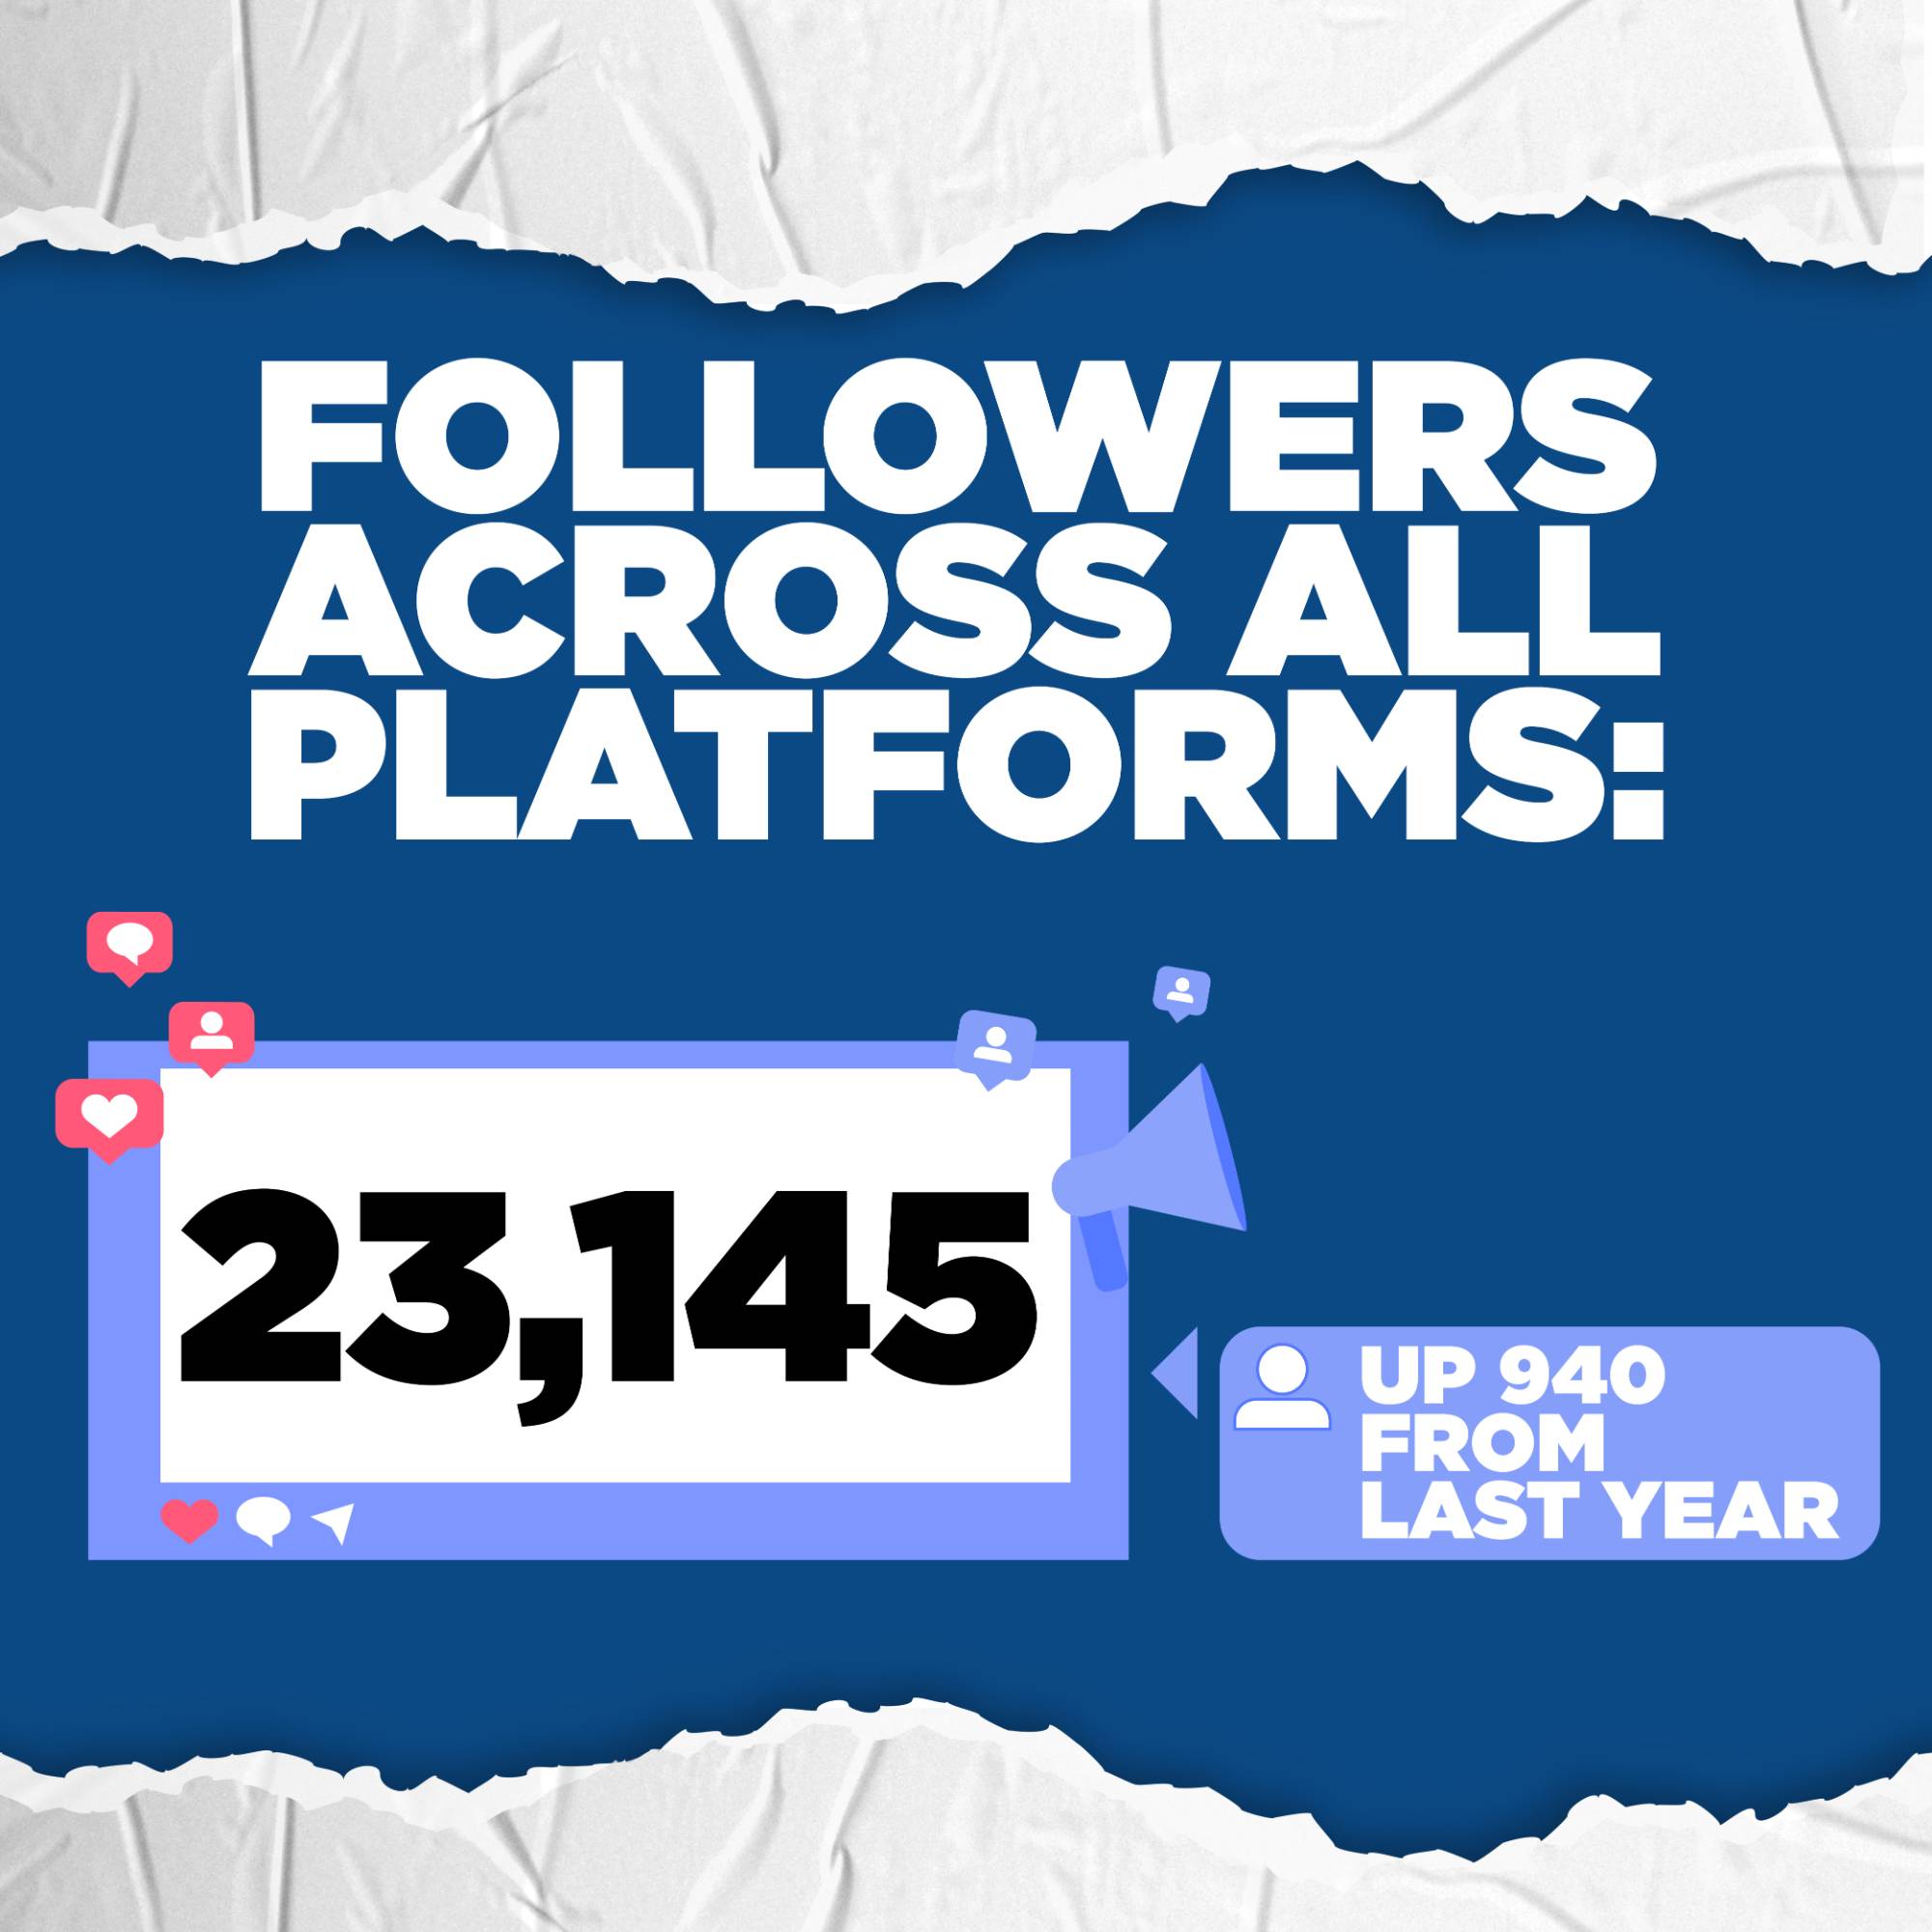 Across our social media accounts, we have a total of 23,145 followers across all platforms. Our following increased by 940 followers in the past year.